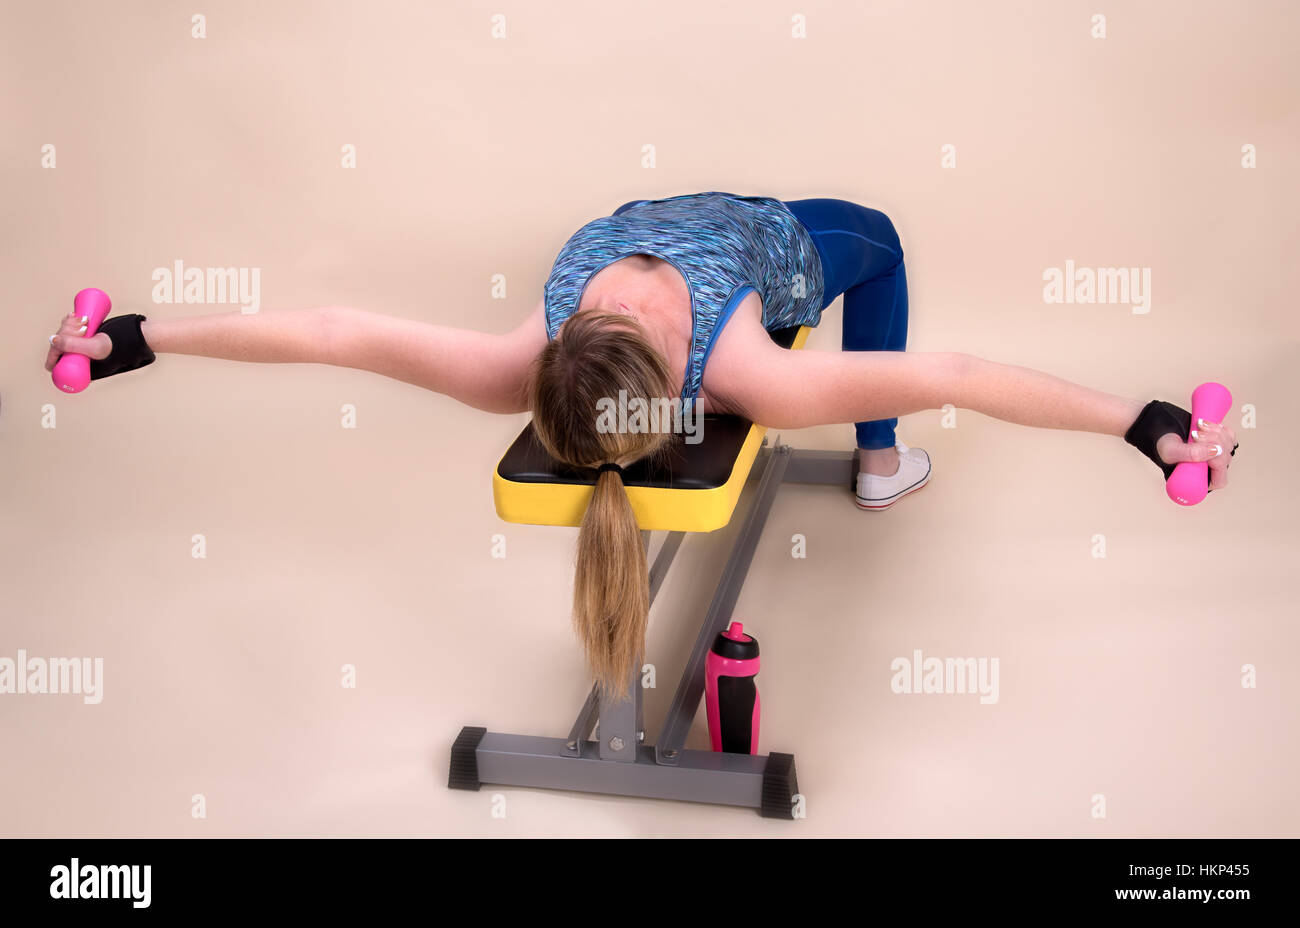 Woman laying on a bench using weights in a gym Stock Photo